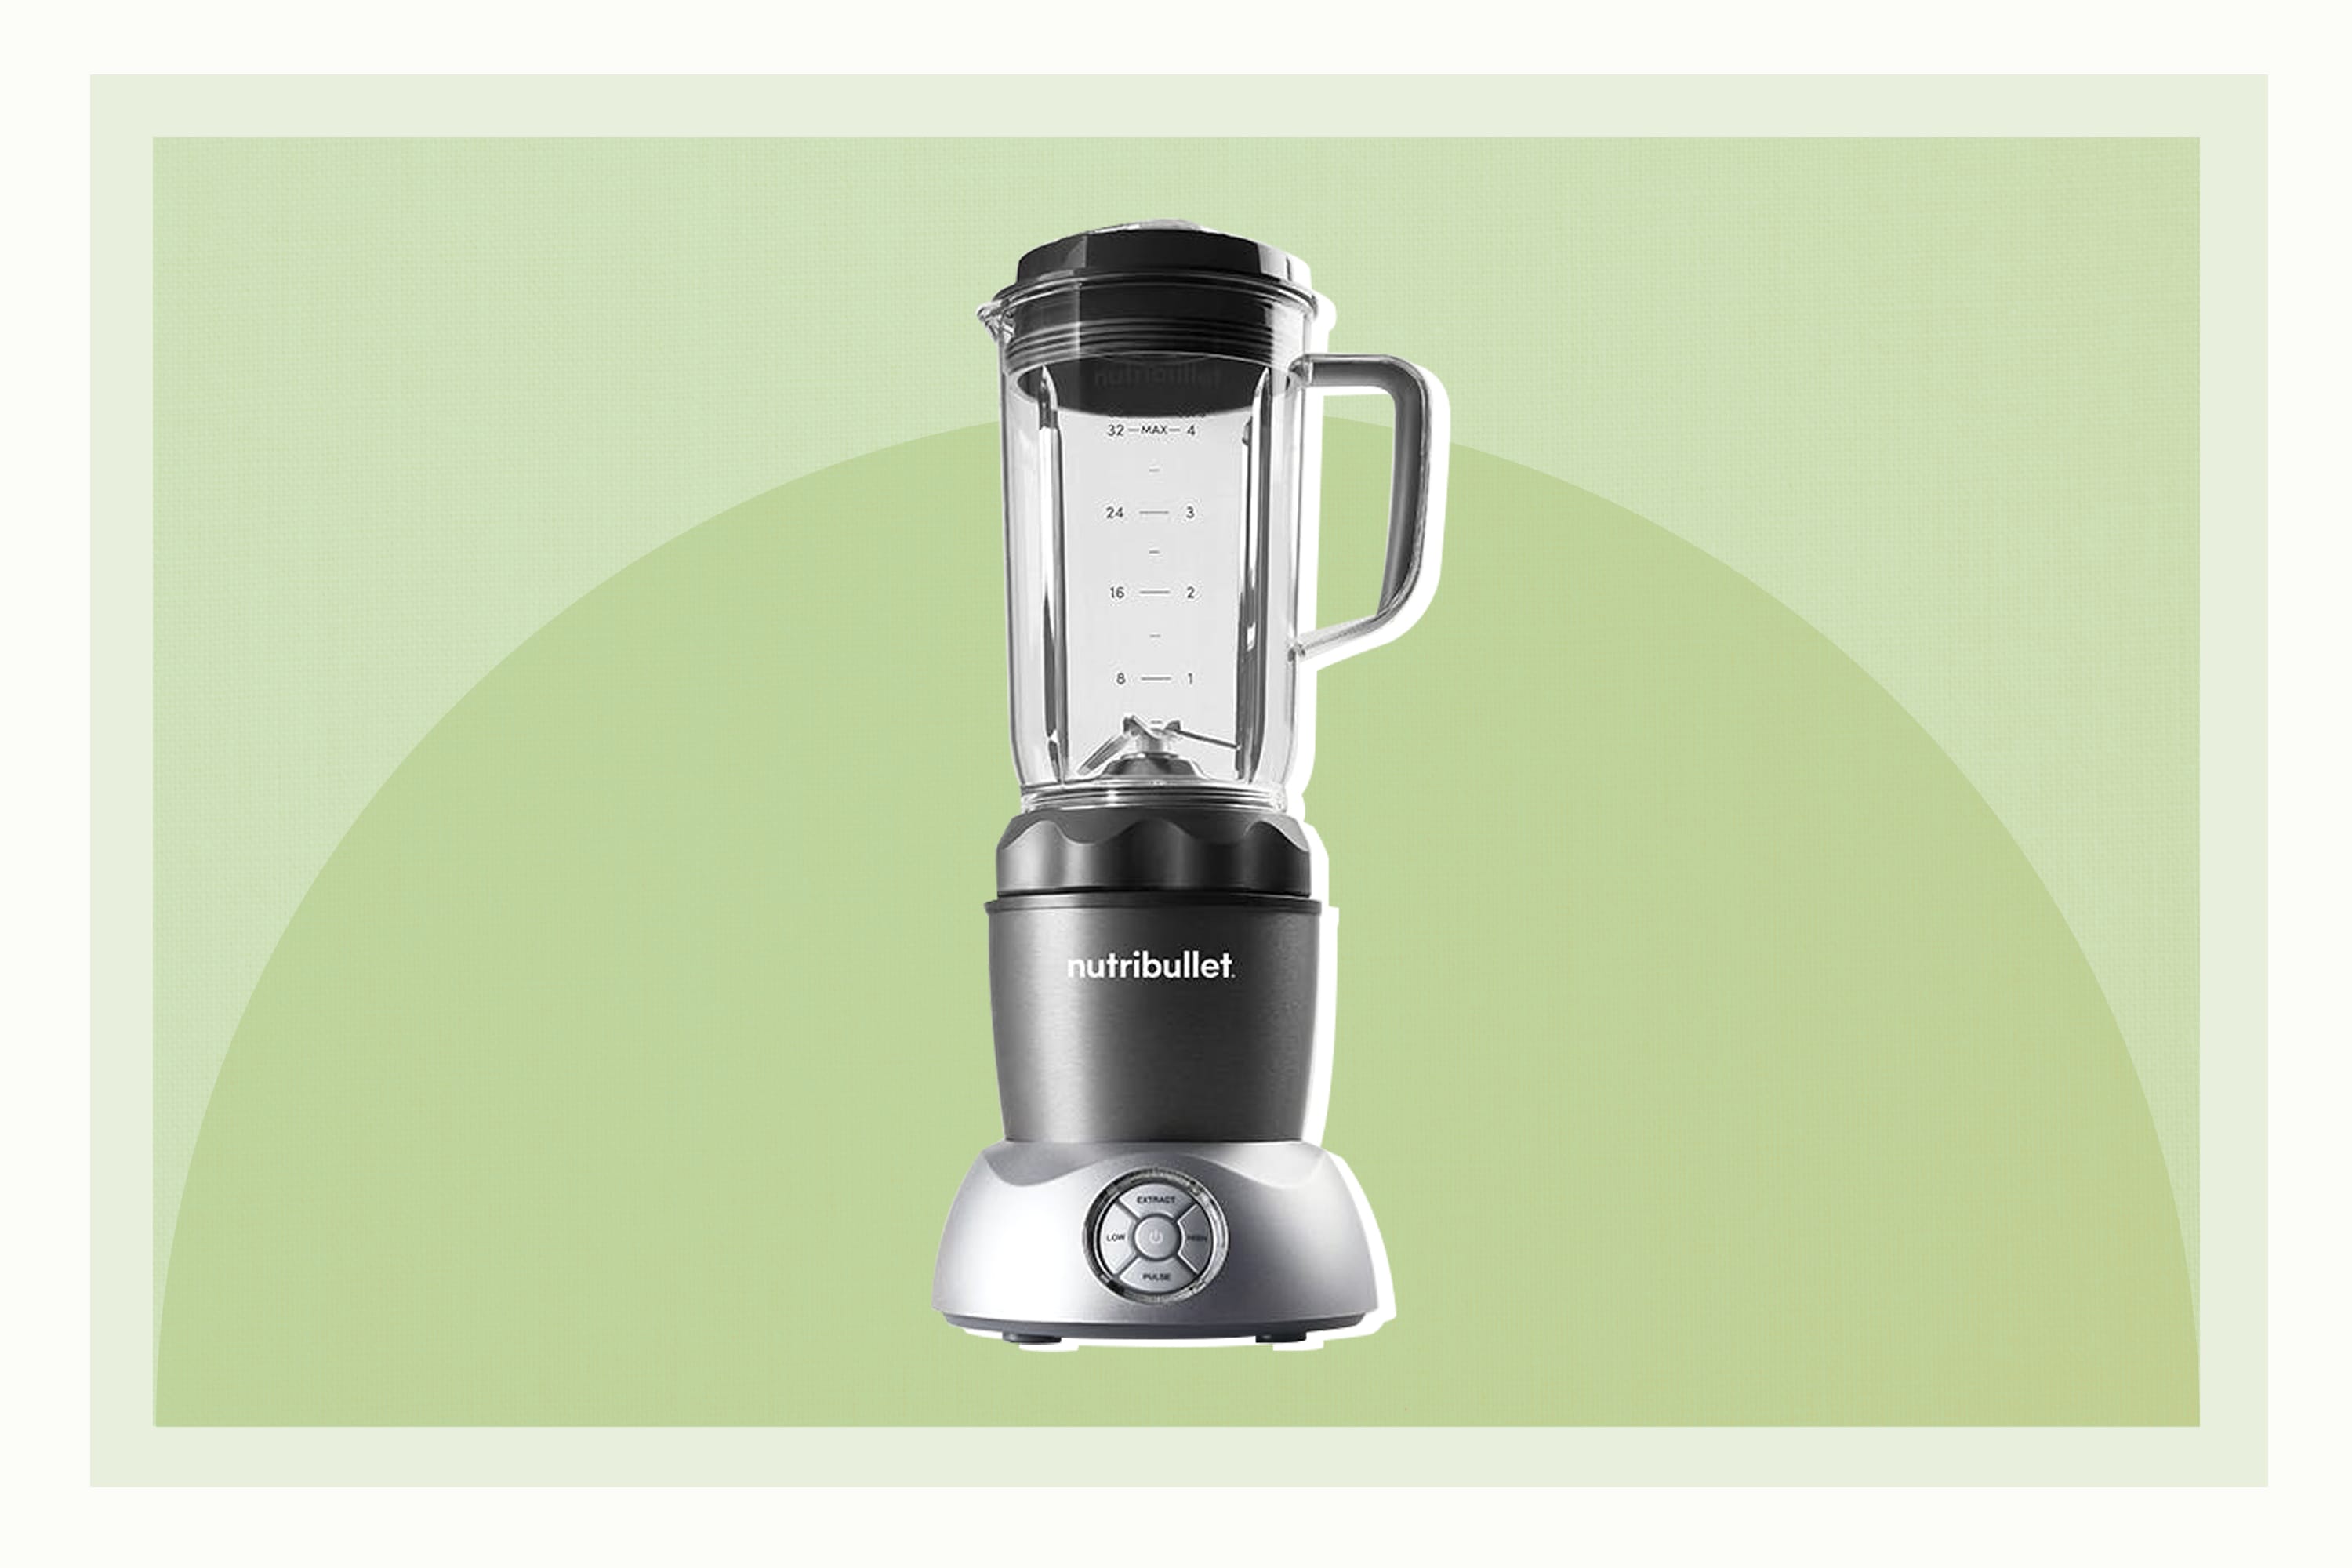 NutriBullet's Wildly Popular Blenders Are on Sale for Black Friday with Our  Exclusive Code